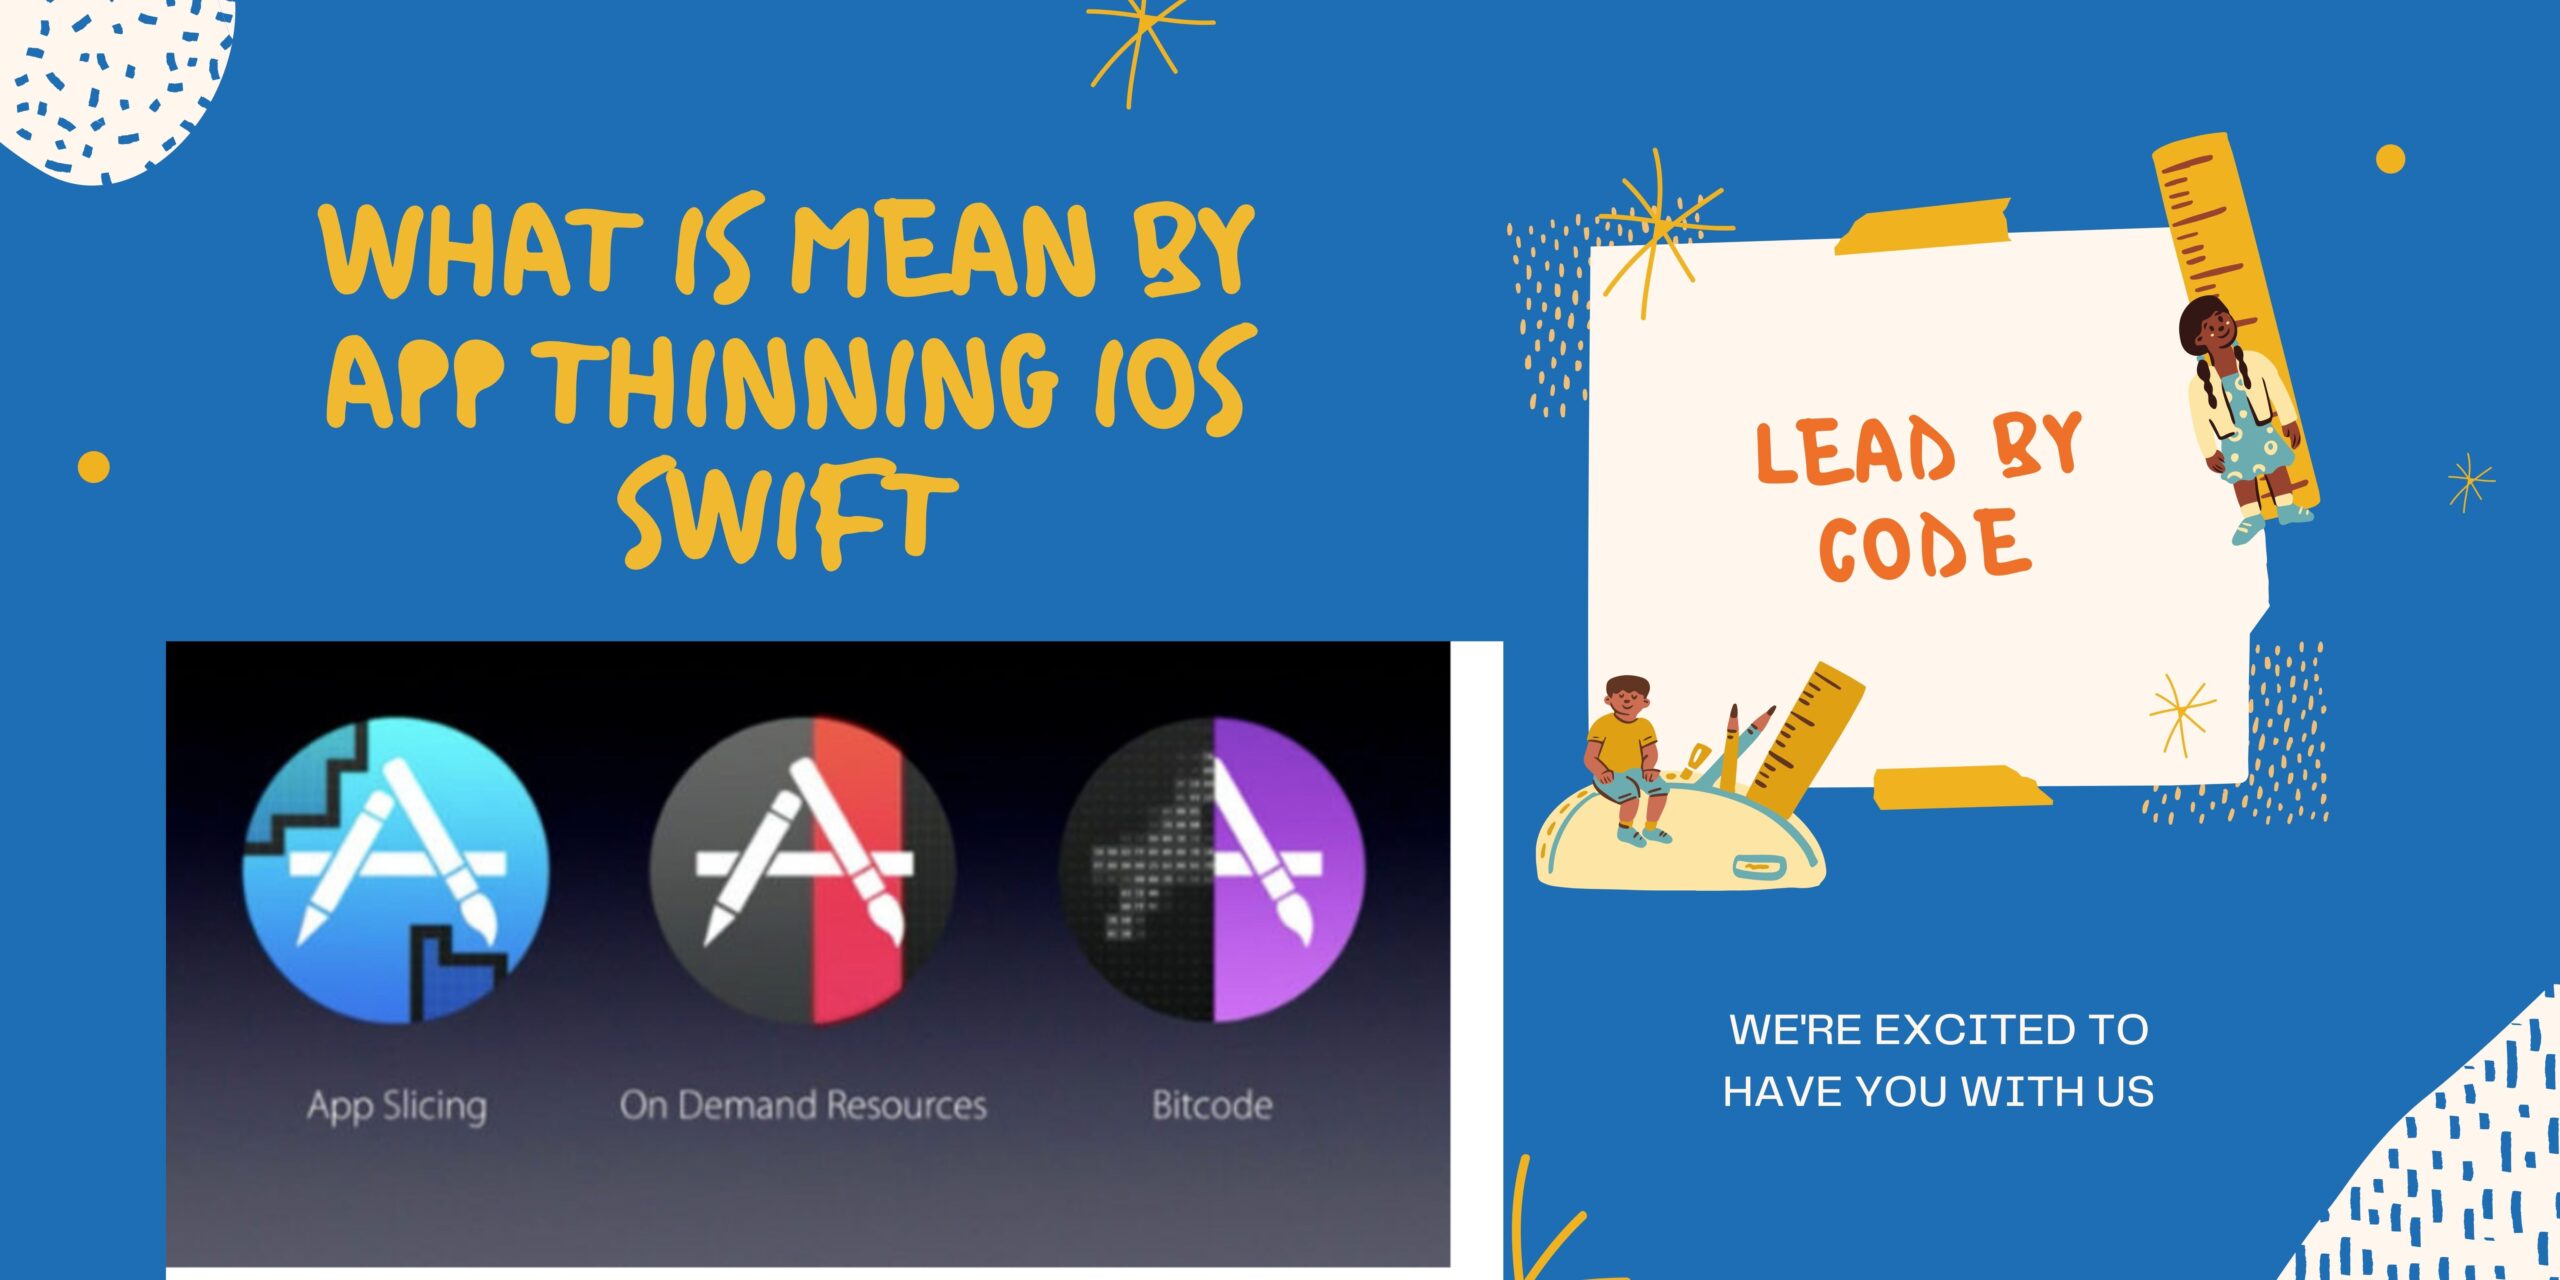 what is mean by ios App Thinning swift